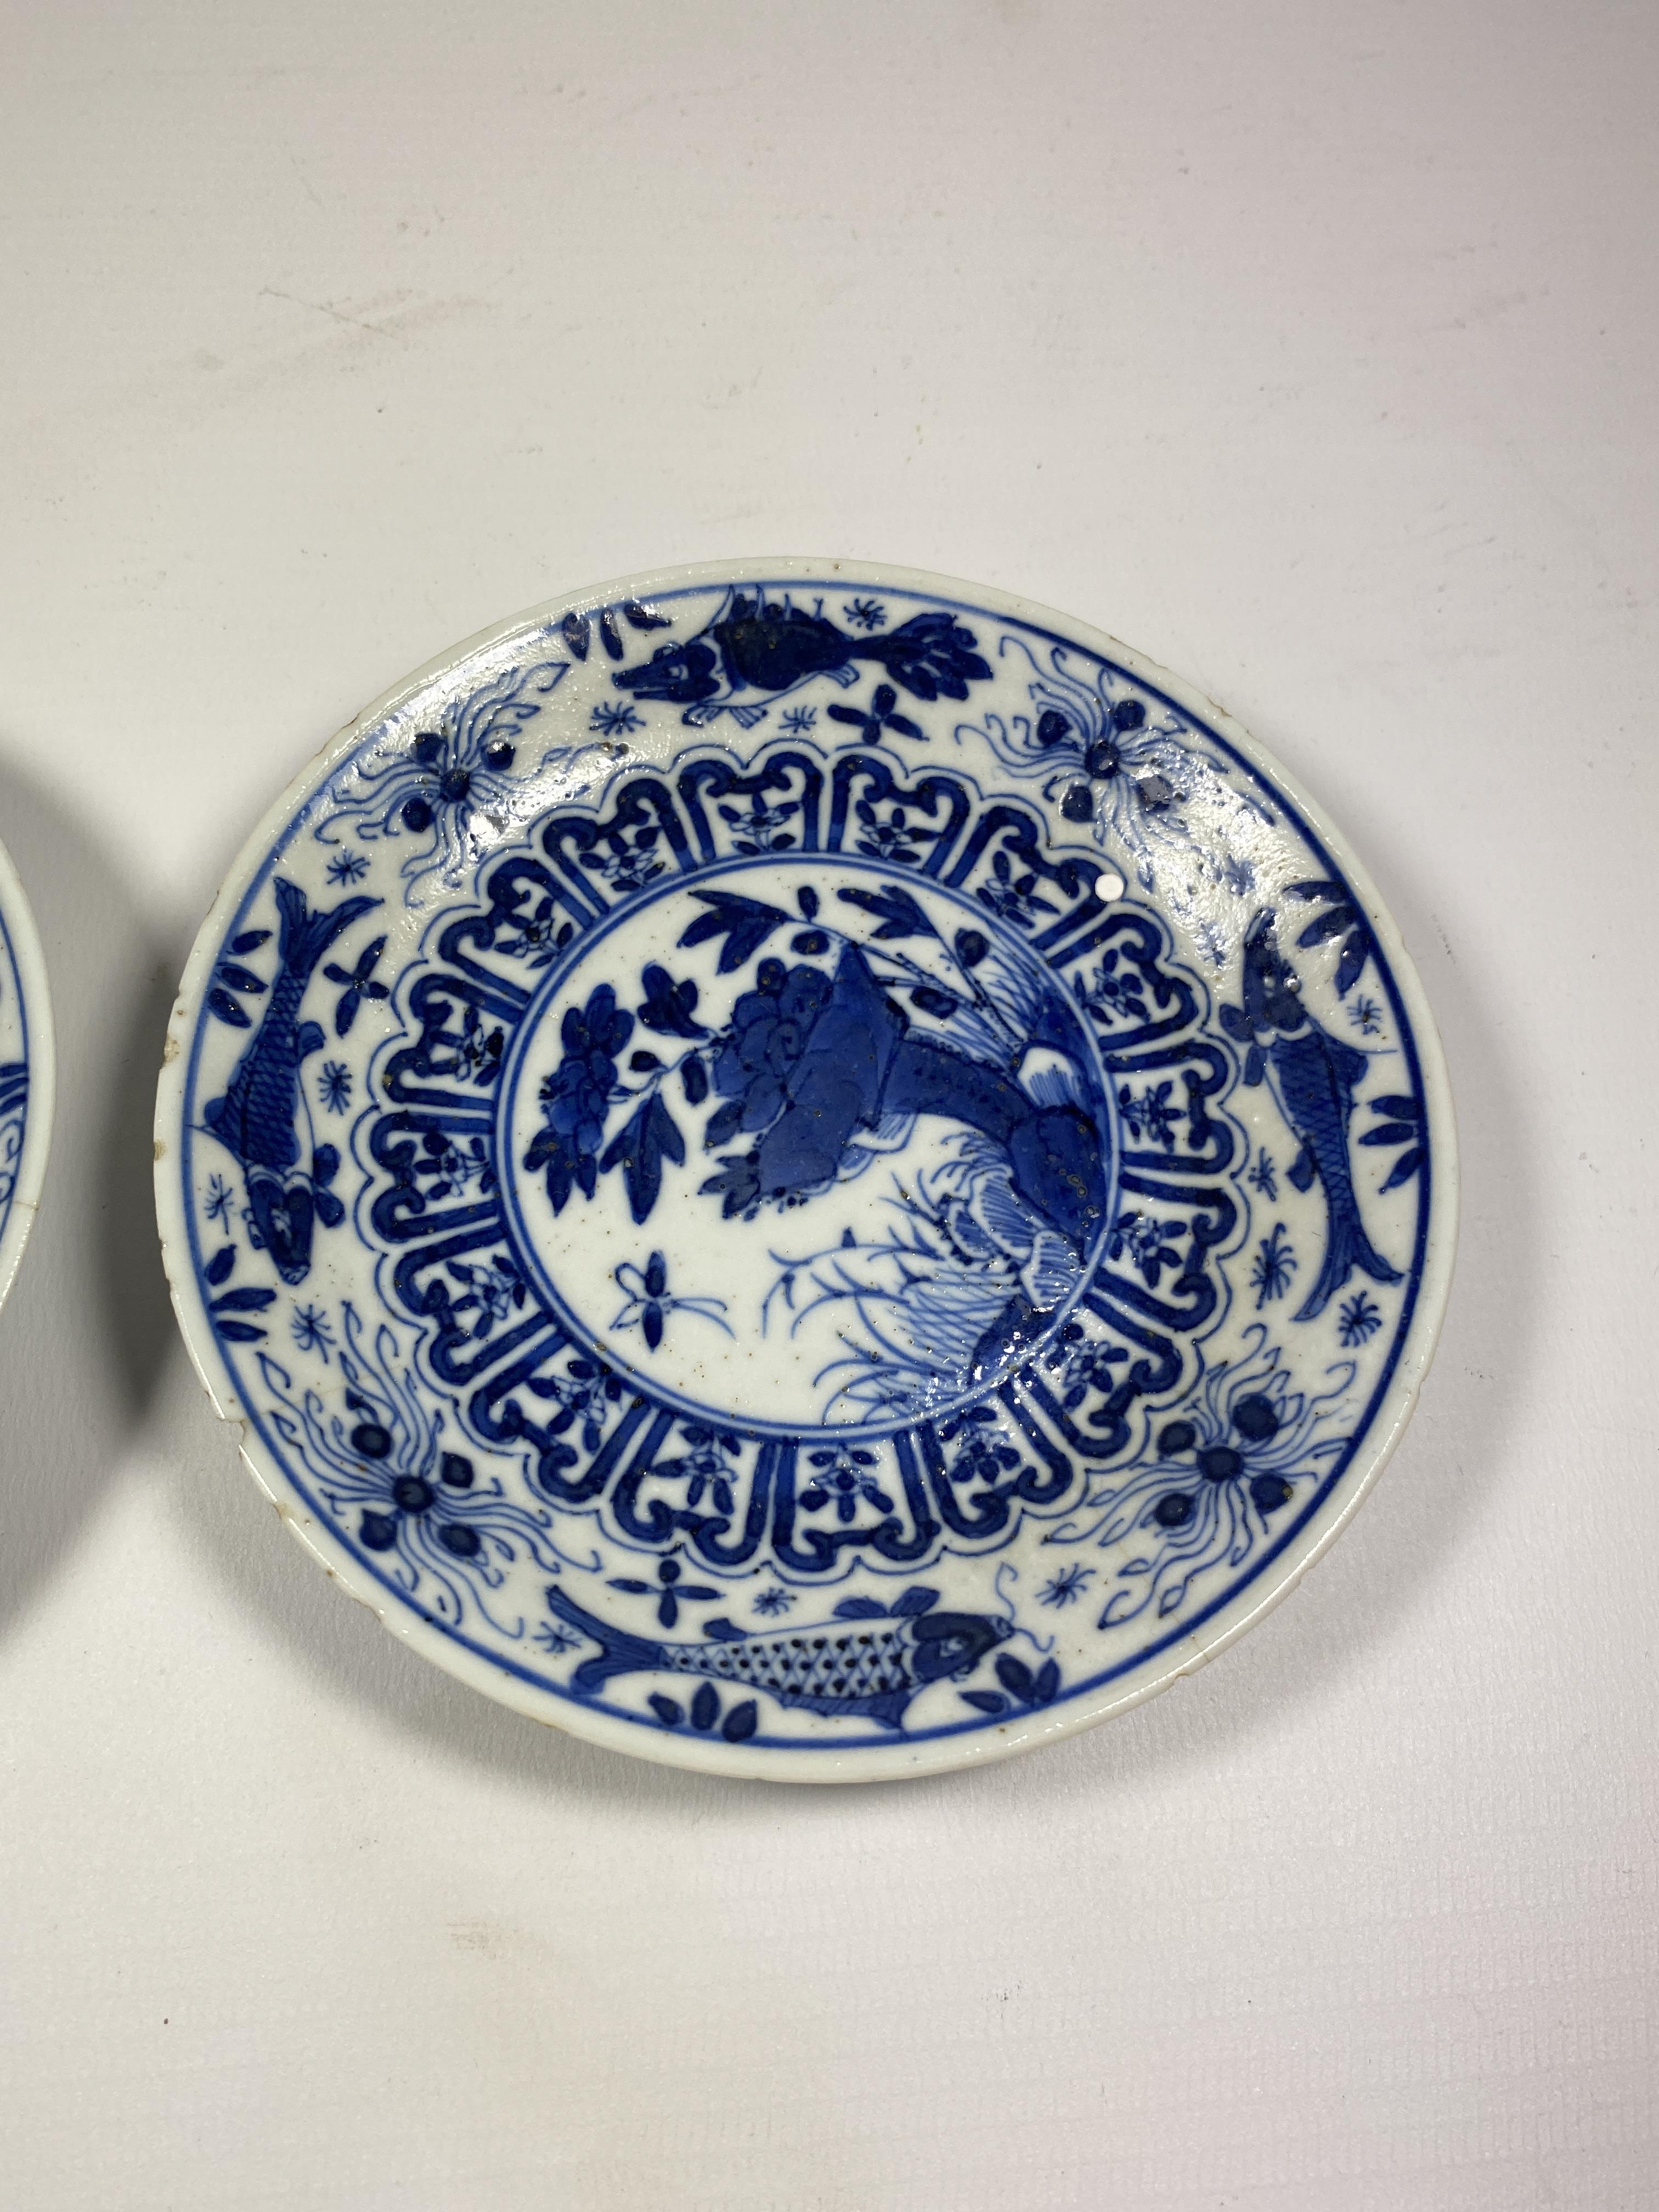 A PAIR OF EARLY 18TH CENTURY, POSSIBLY KANGXI PERIOD (1661-1722), CHINESE PORCELAIN BLUE & WHITE - Image 3 of 5